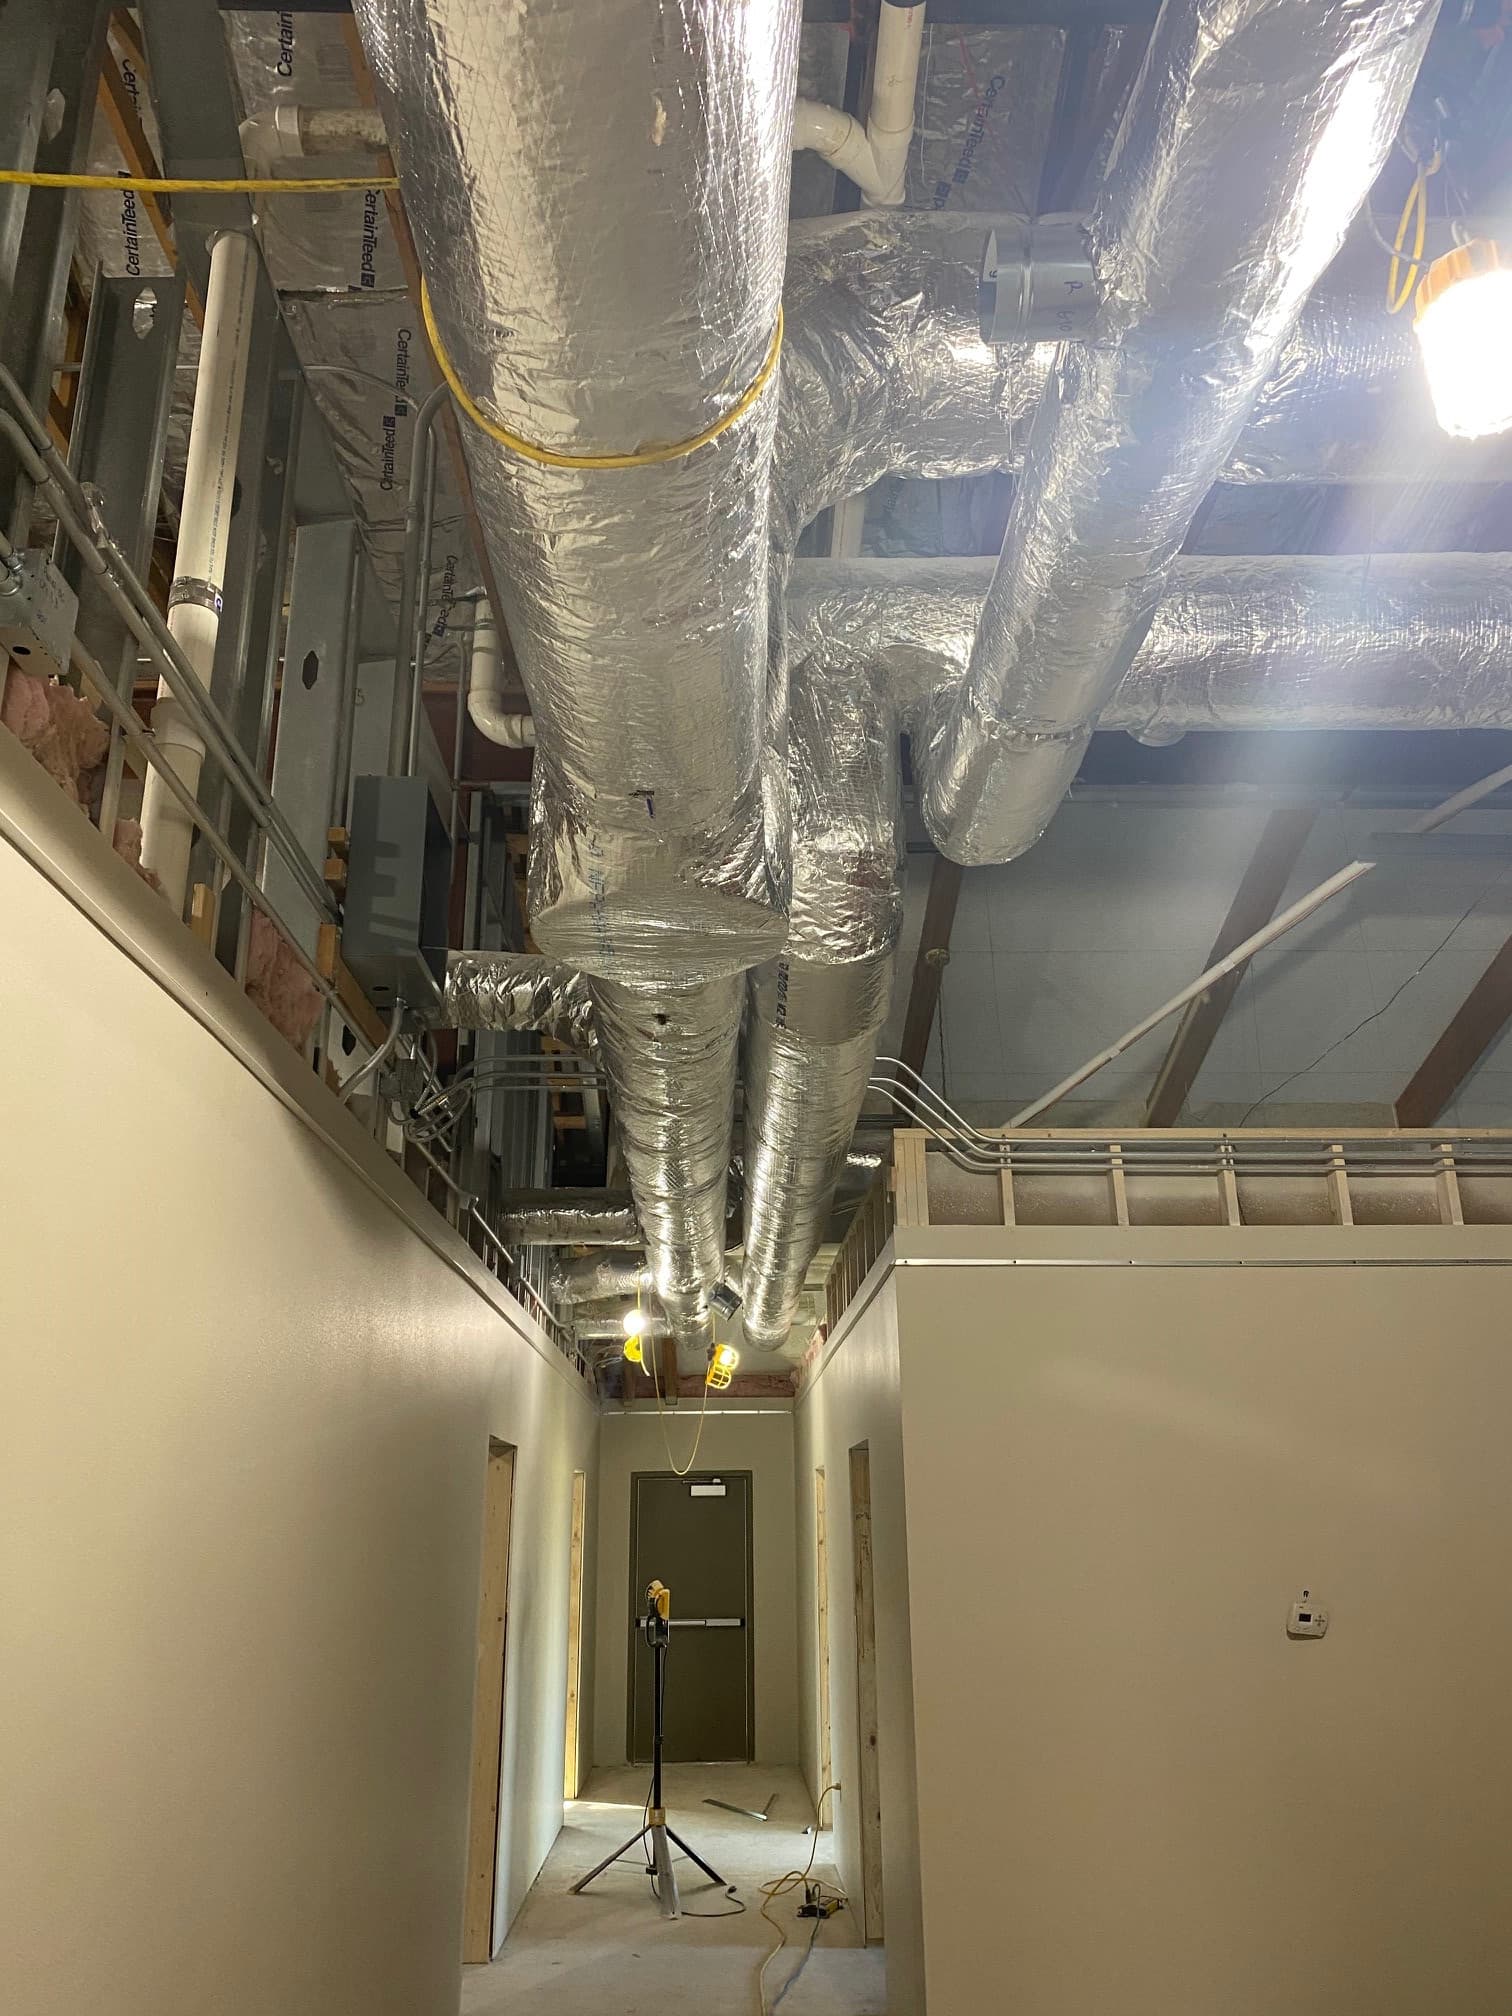 HVAC duct work in the ceiling